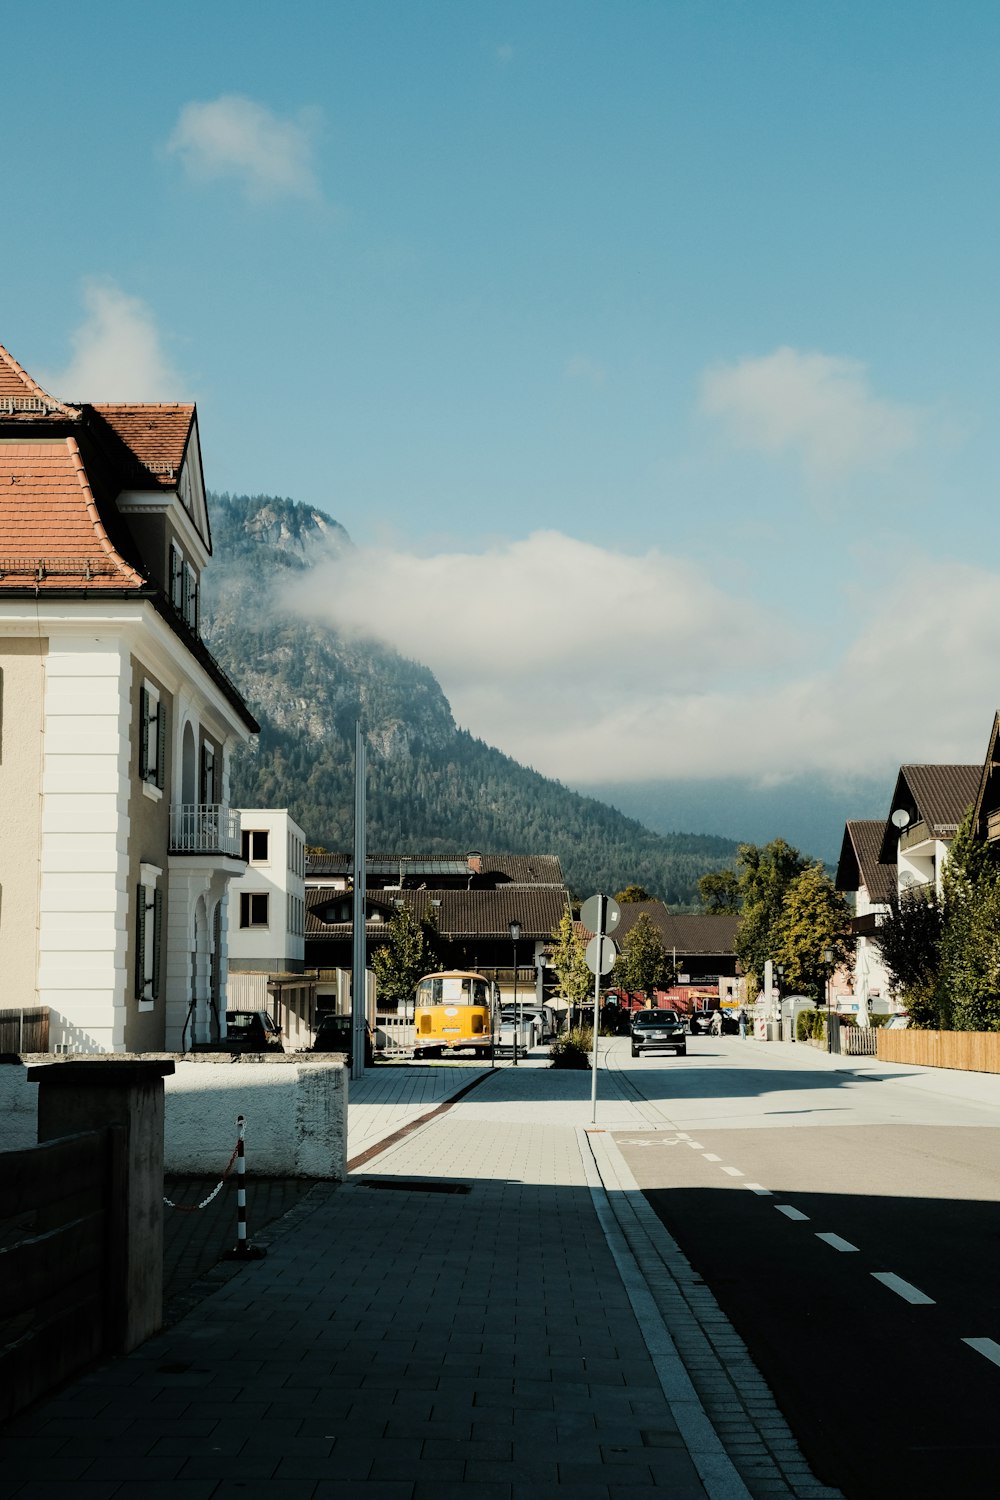 a street with houses and a mountain in the background